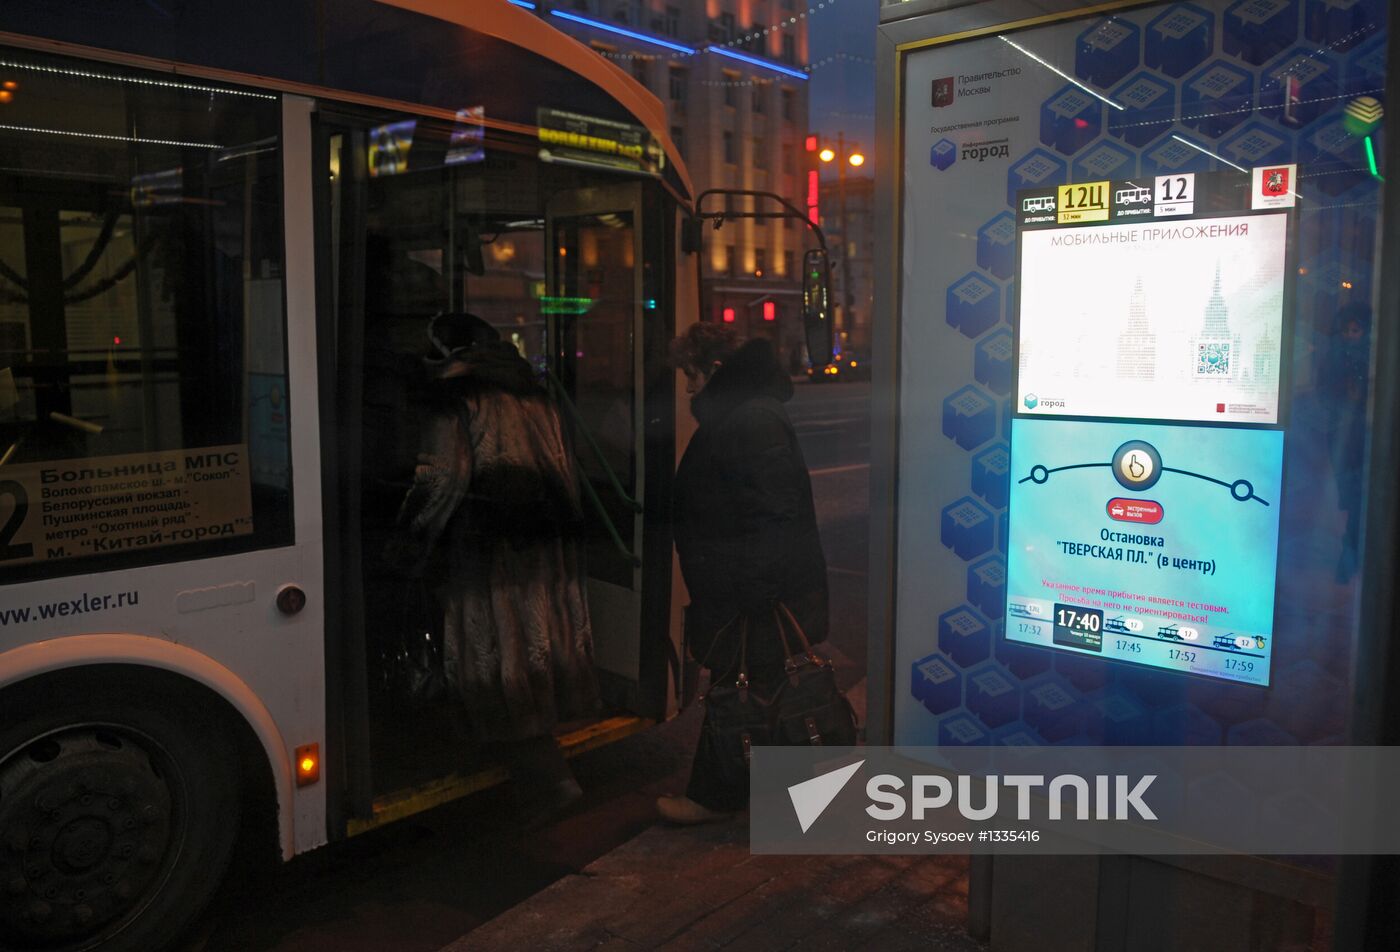 Work of "intellectual" public transport stops in Moscow